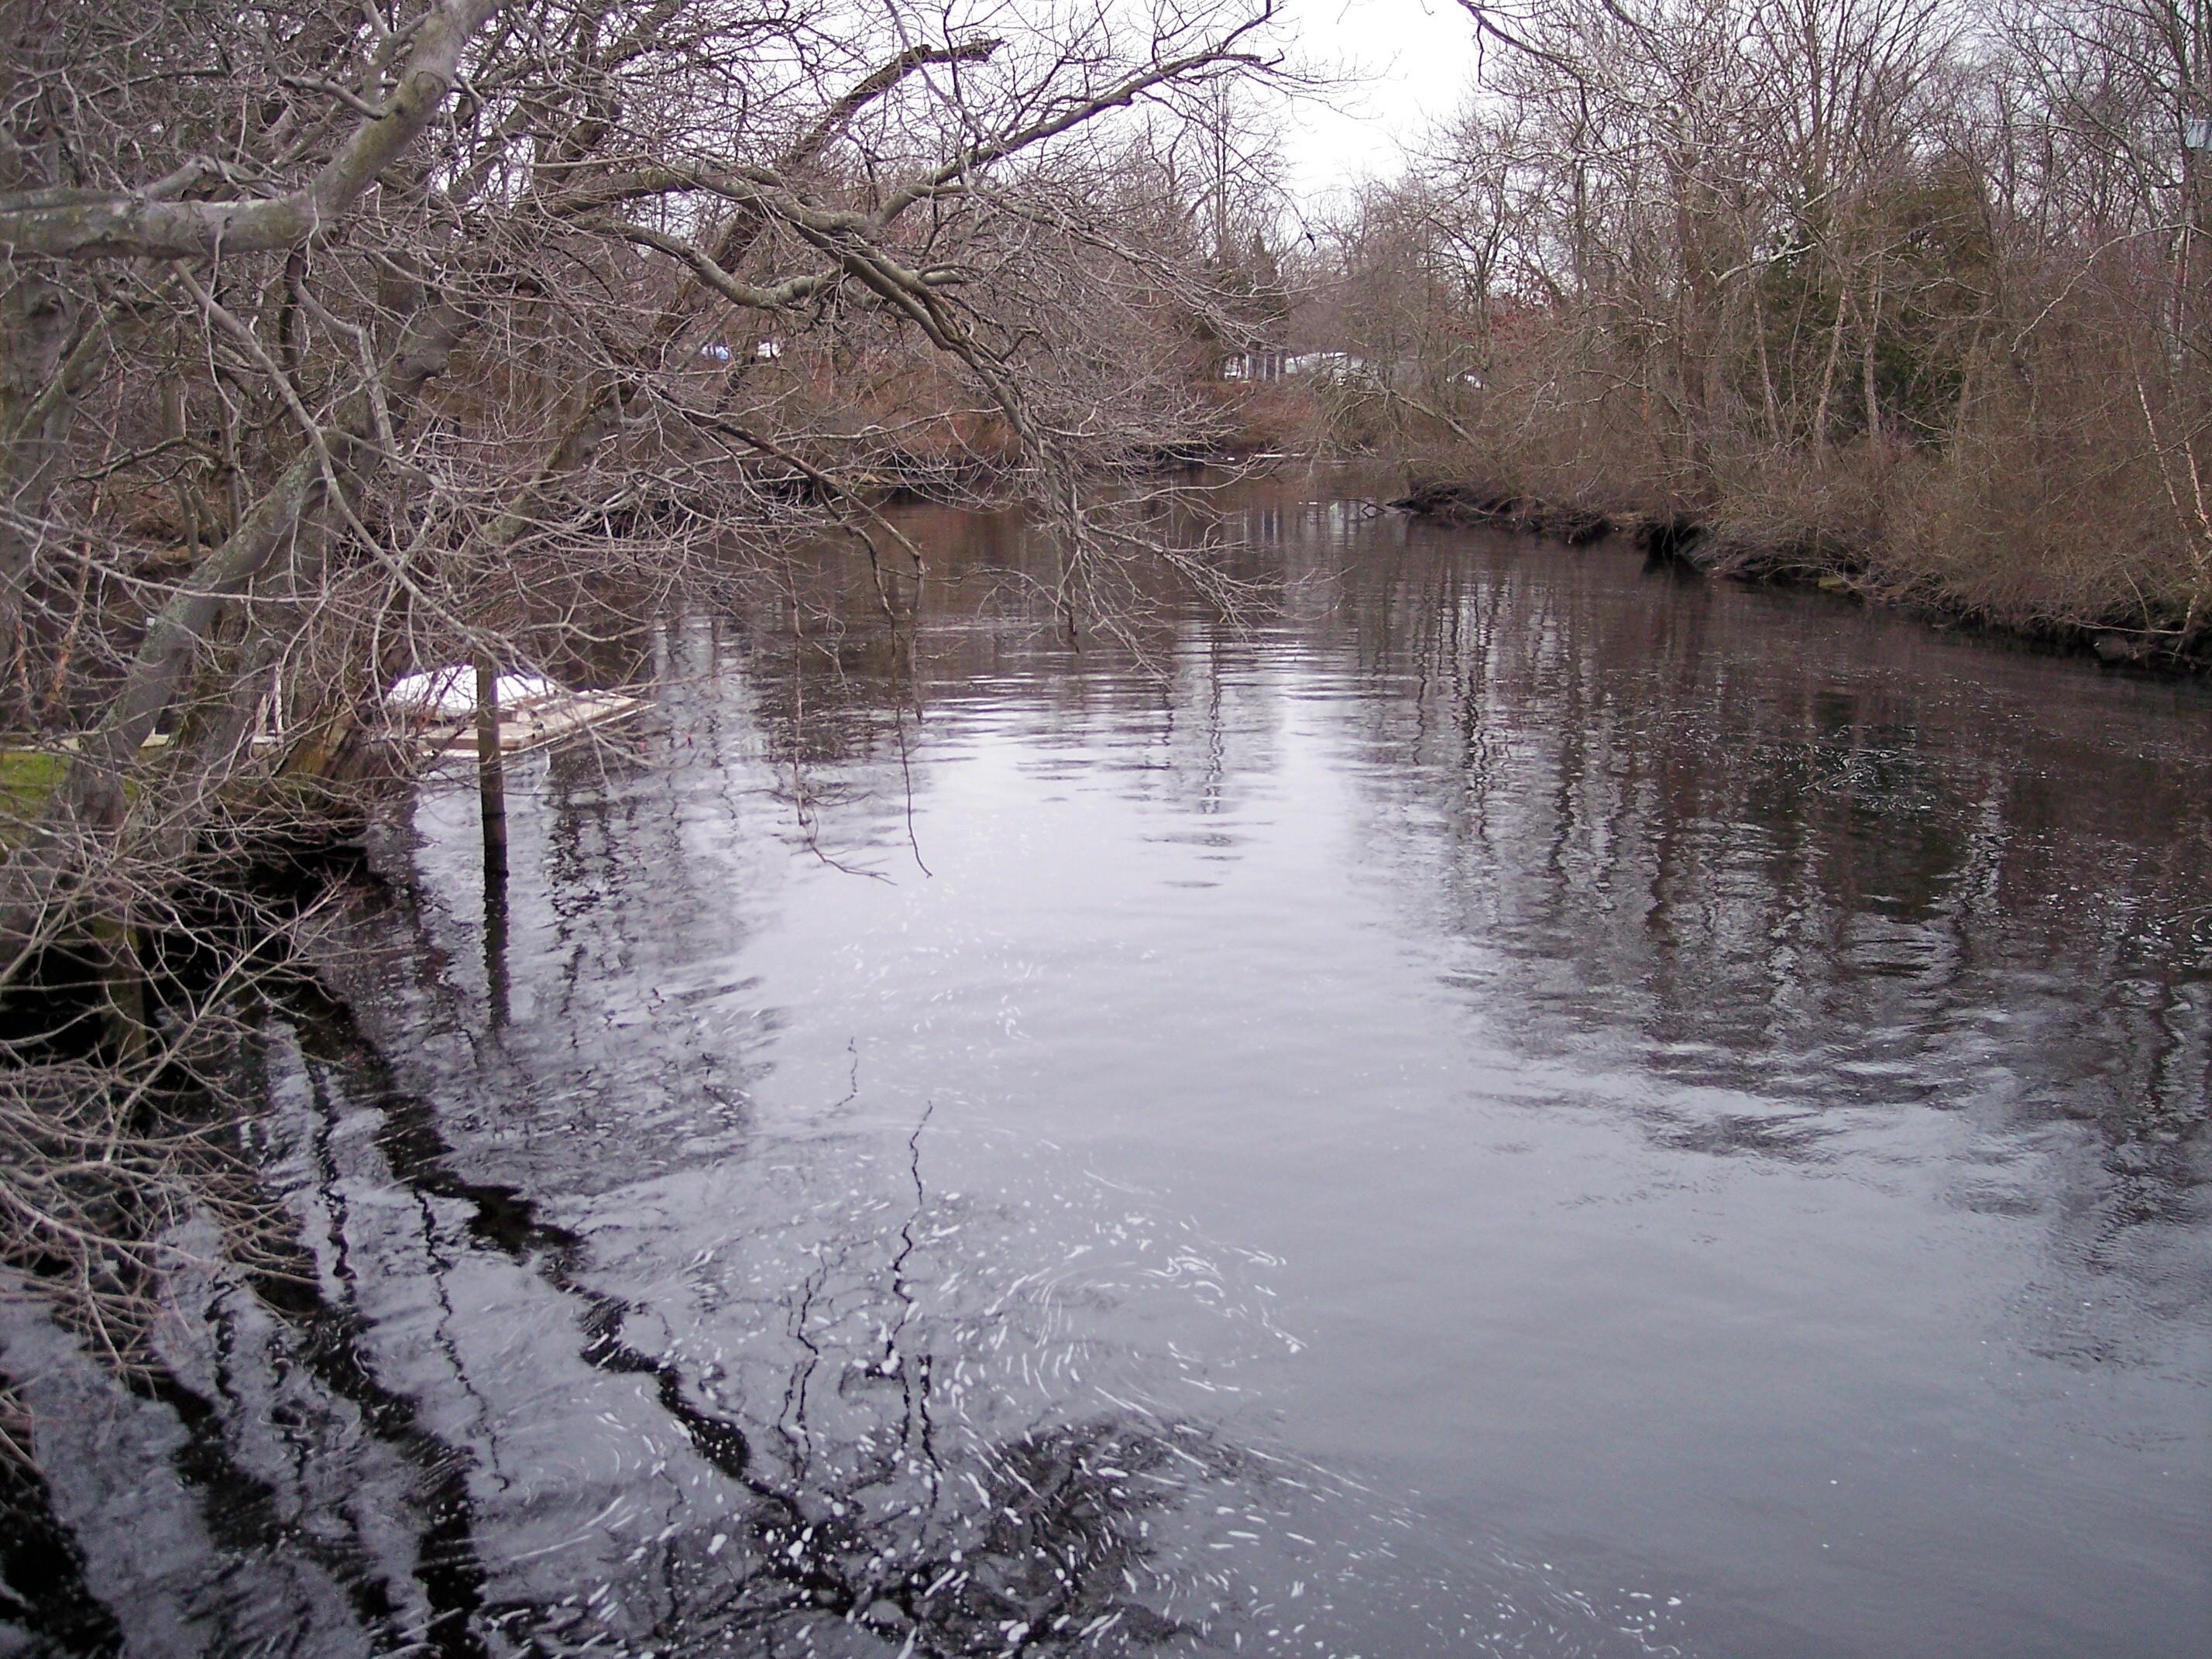 Still river in the winter with leafless trees on either side